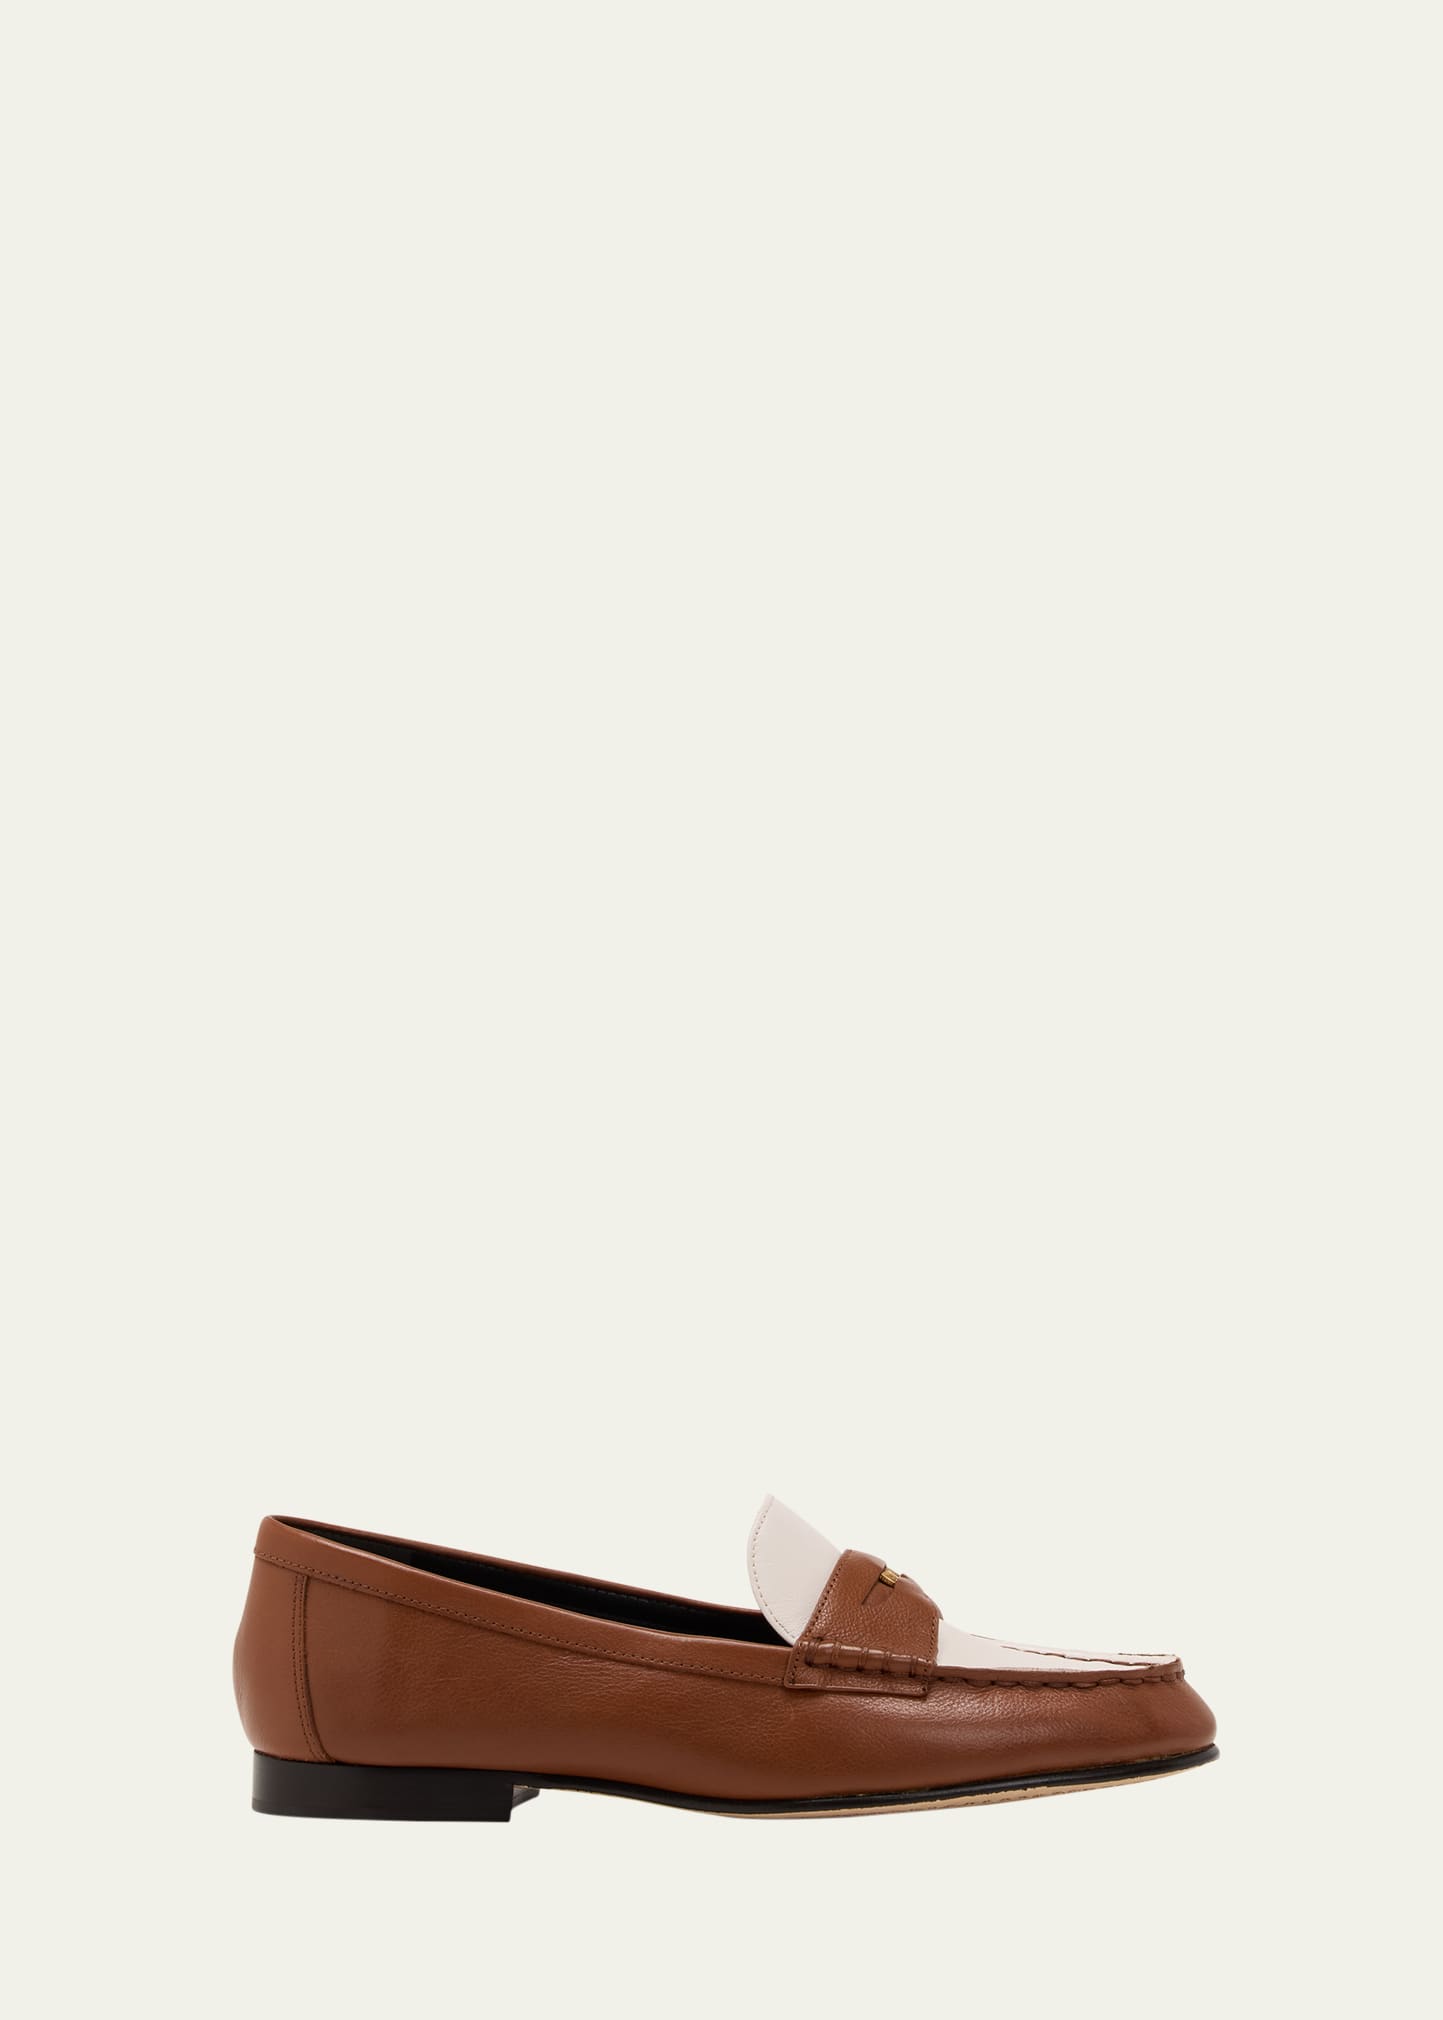 Bicolor Leather Coin Penny Loafers